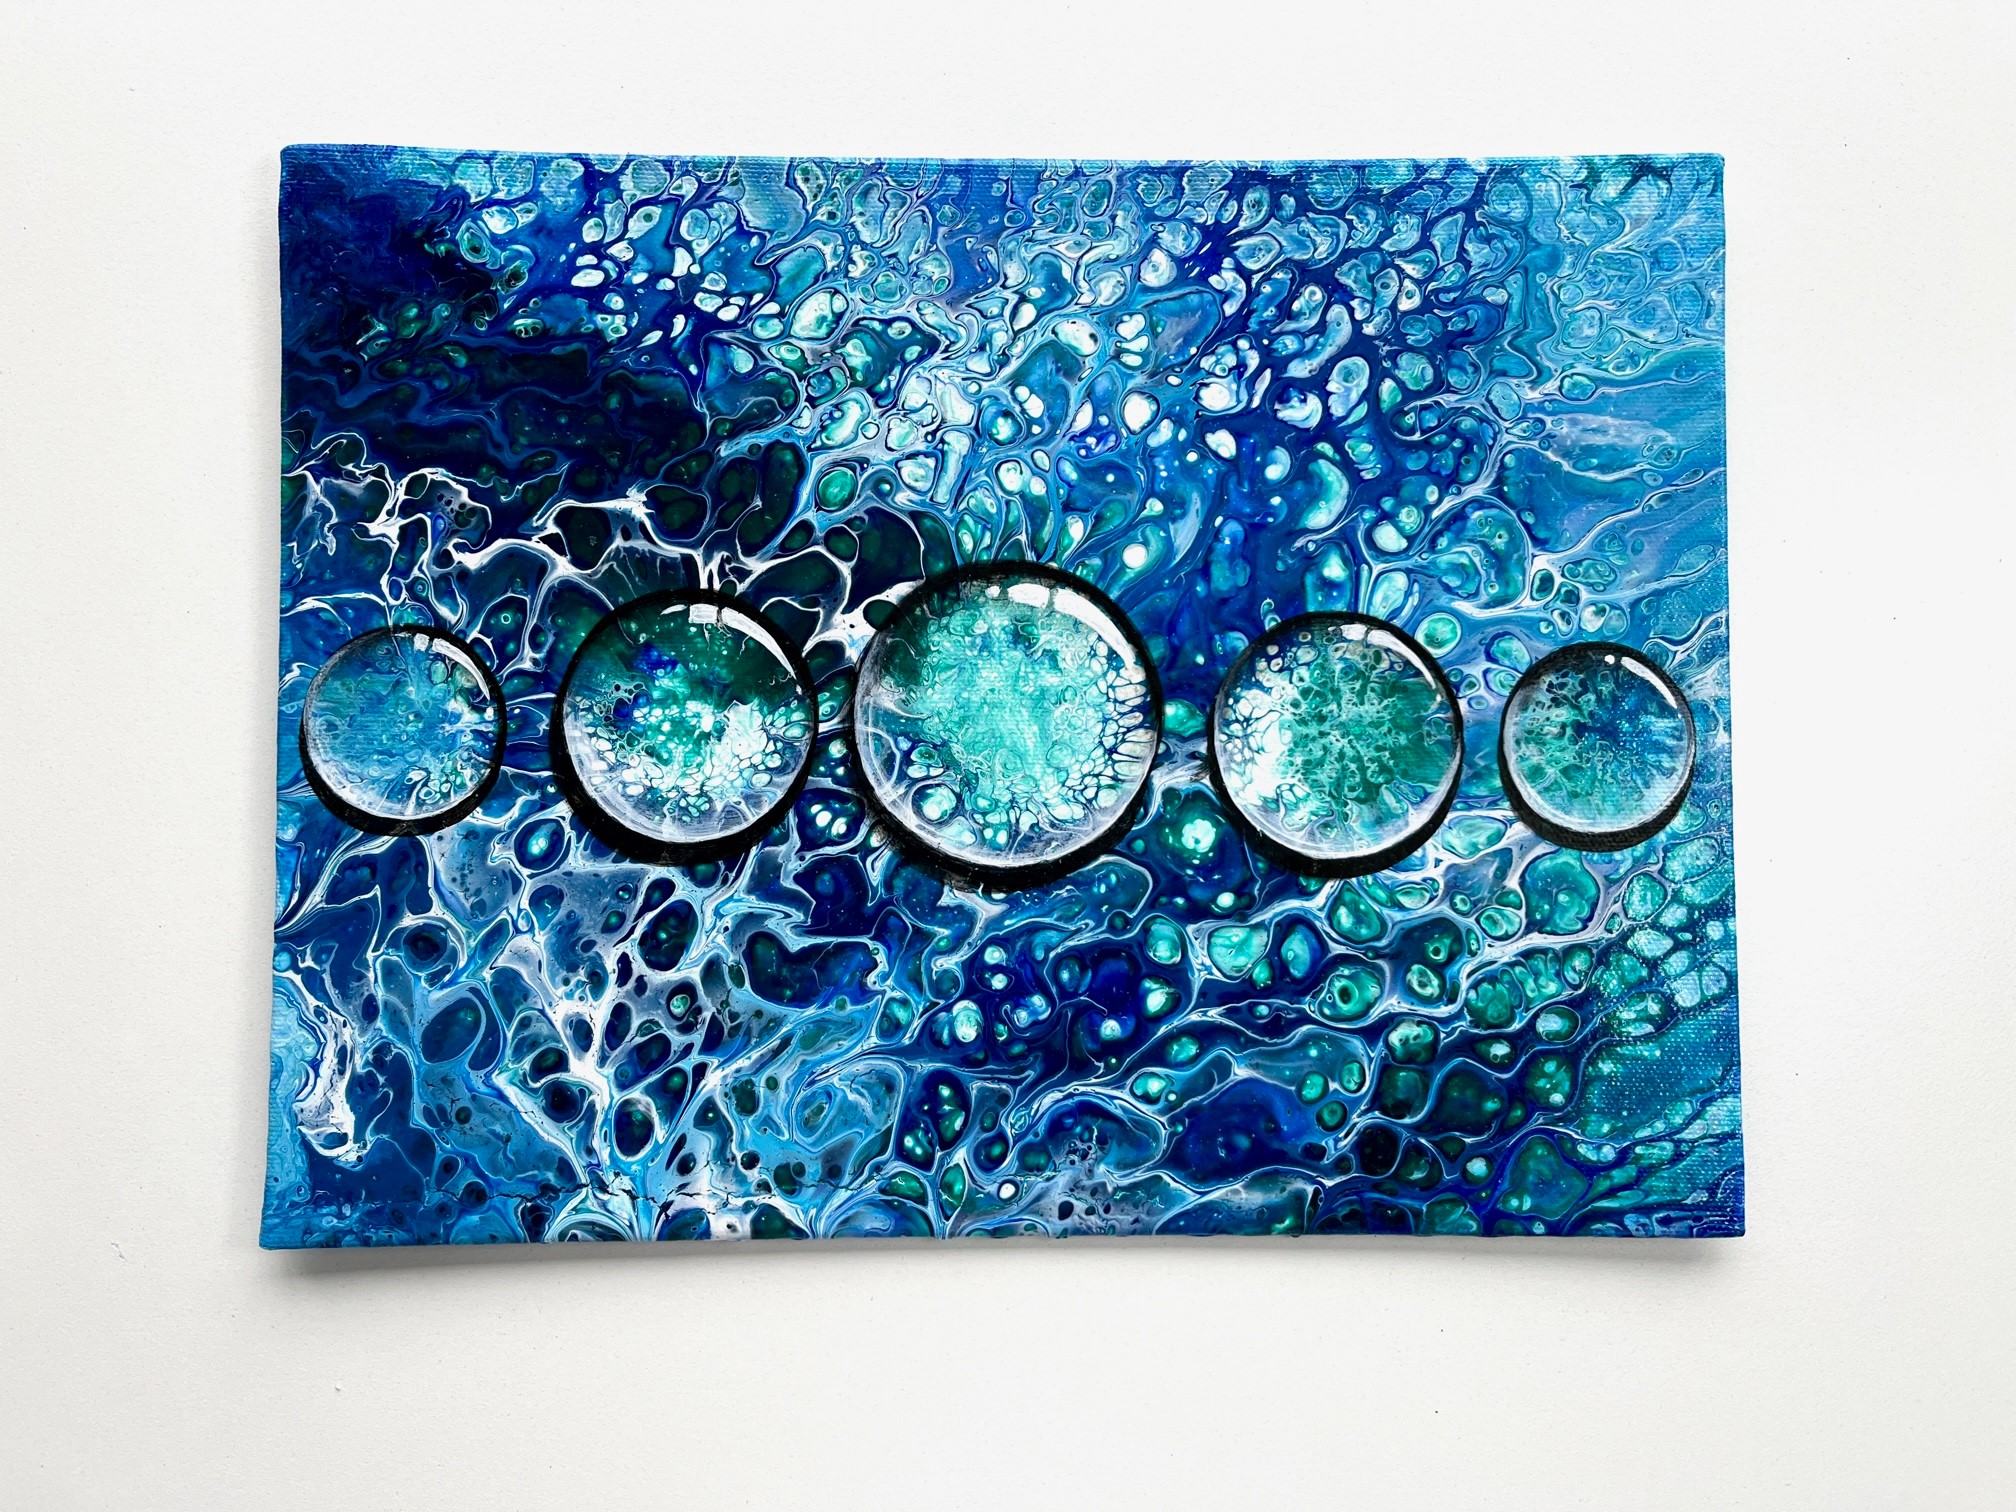 Unique acrylic pour painting techniques by Madeline Barclay